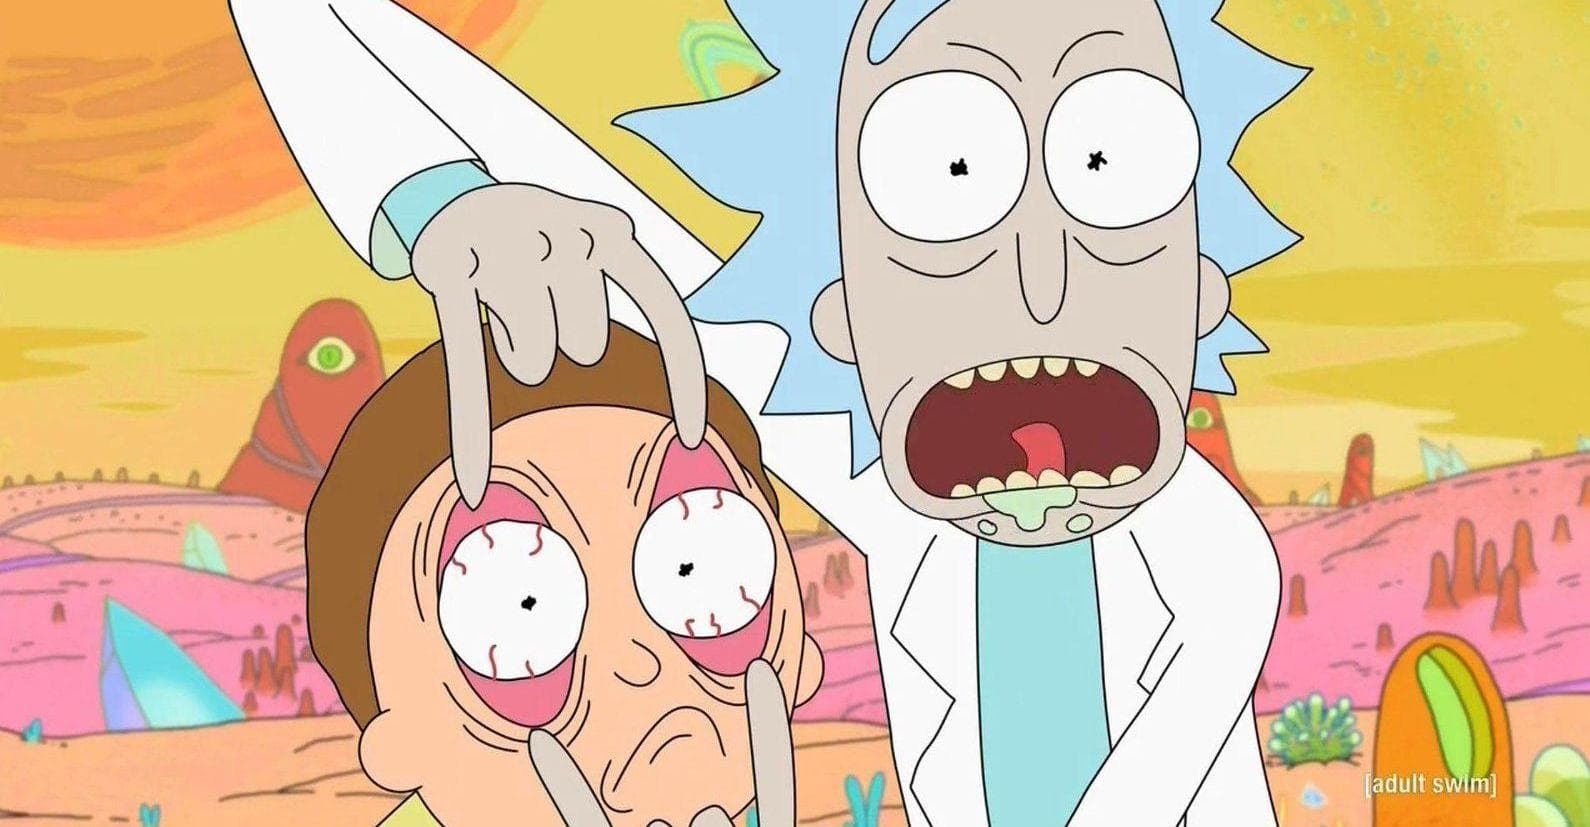 Rick and Morty / Breaking Bad!  Rick and morty tattoo, Rick and